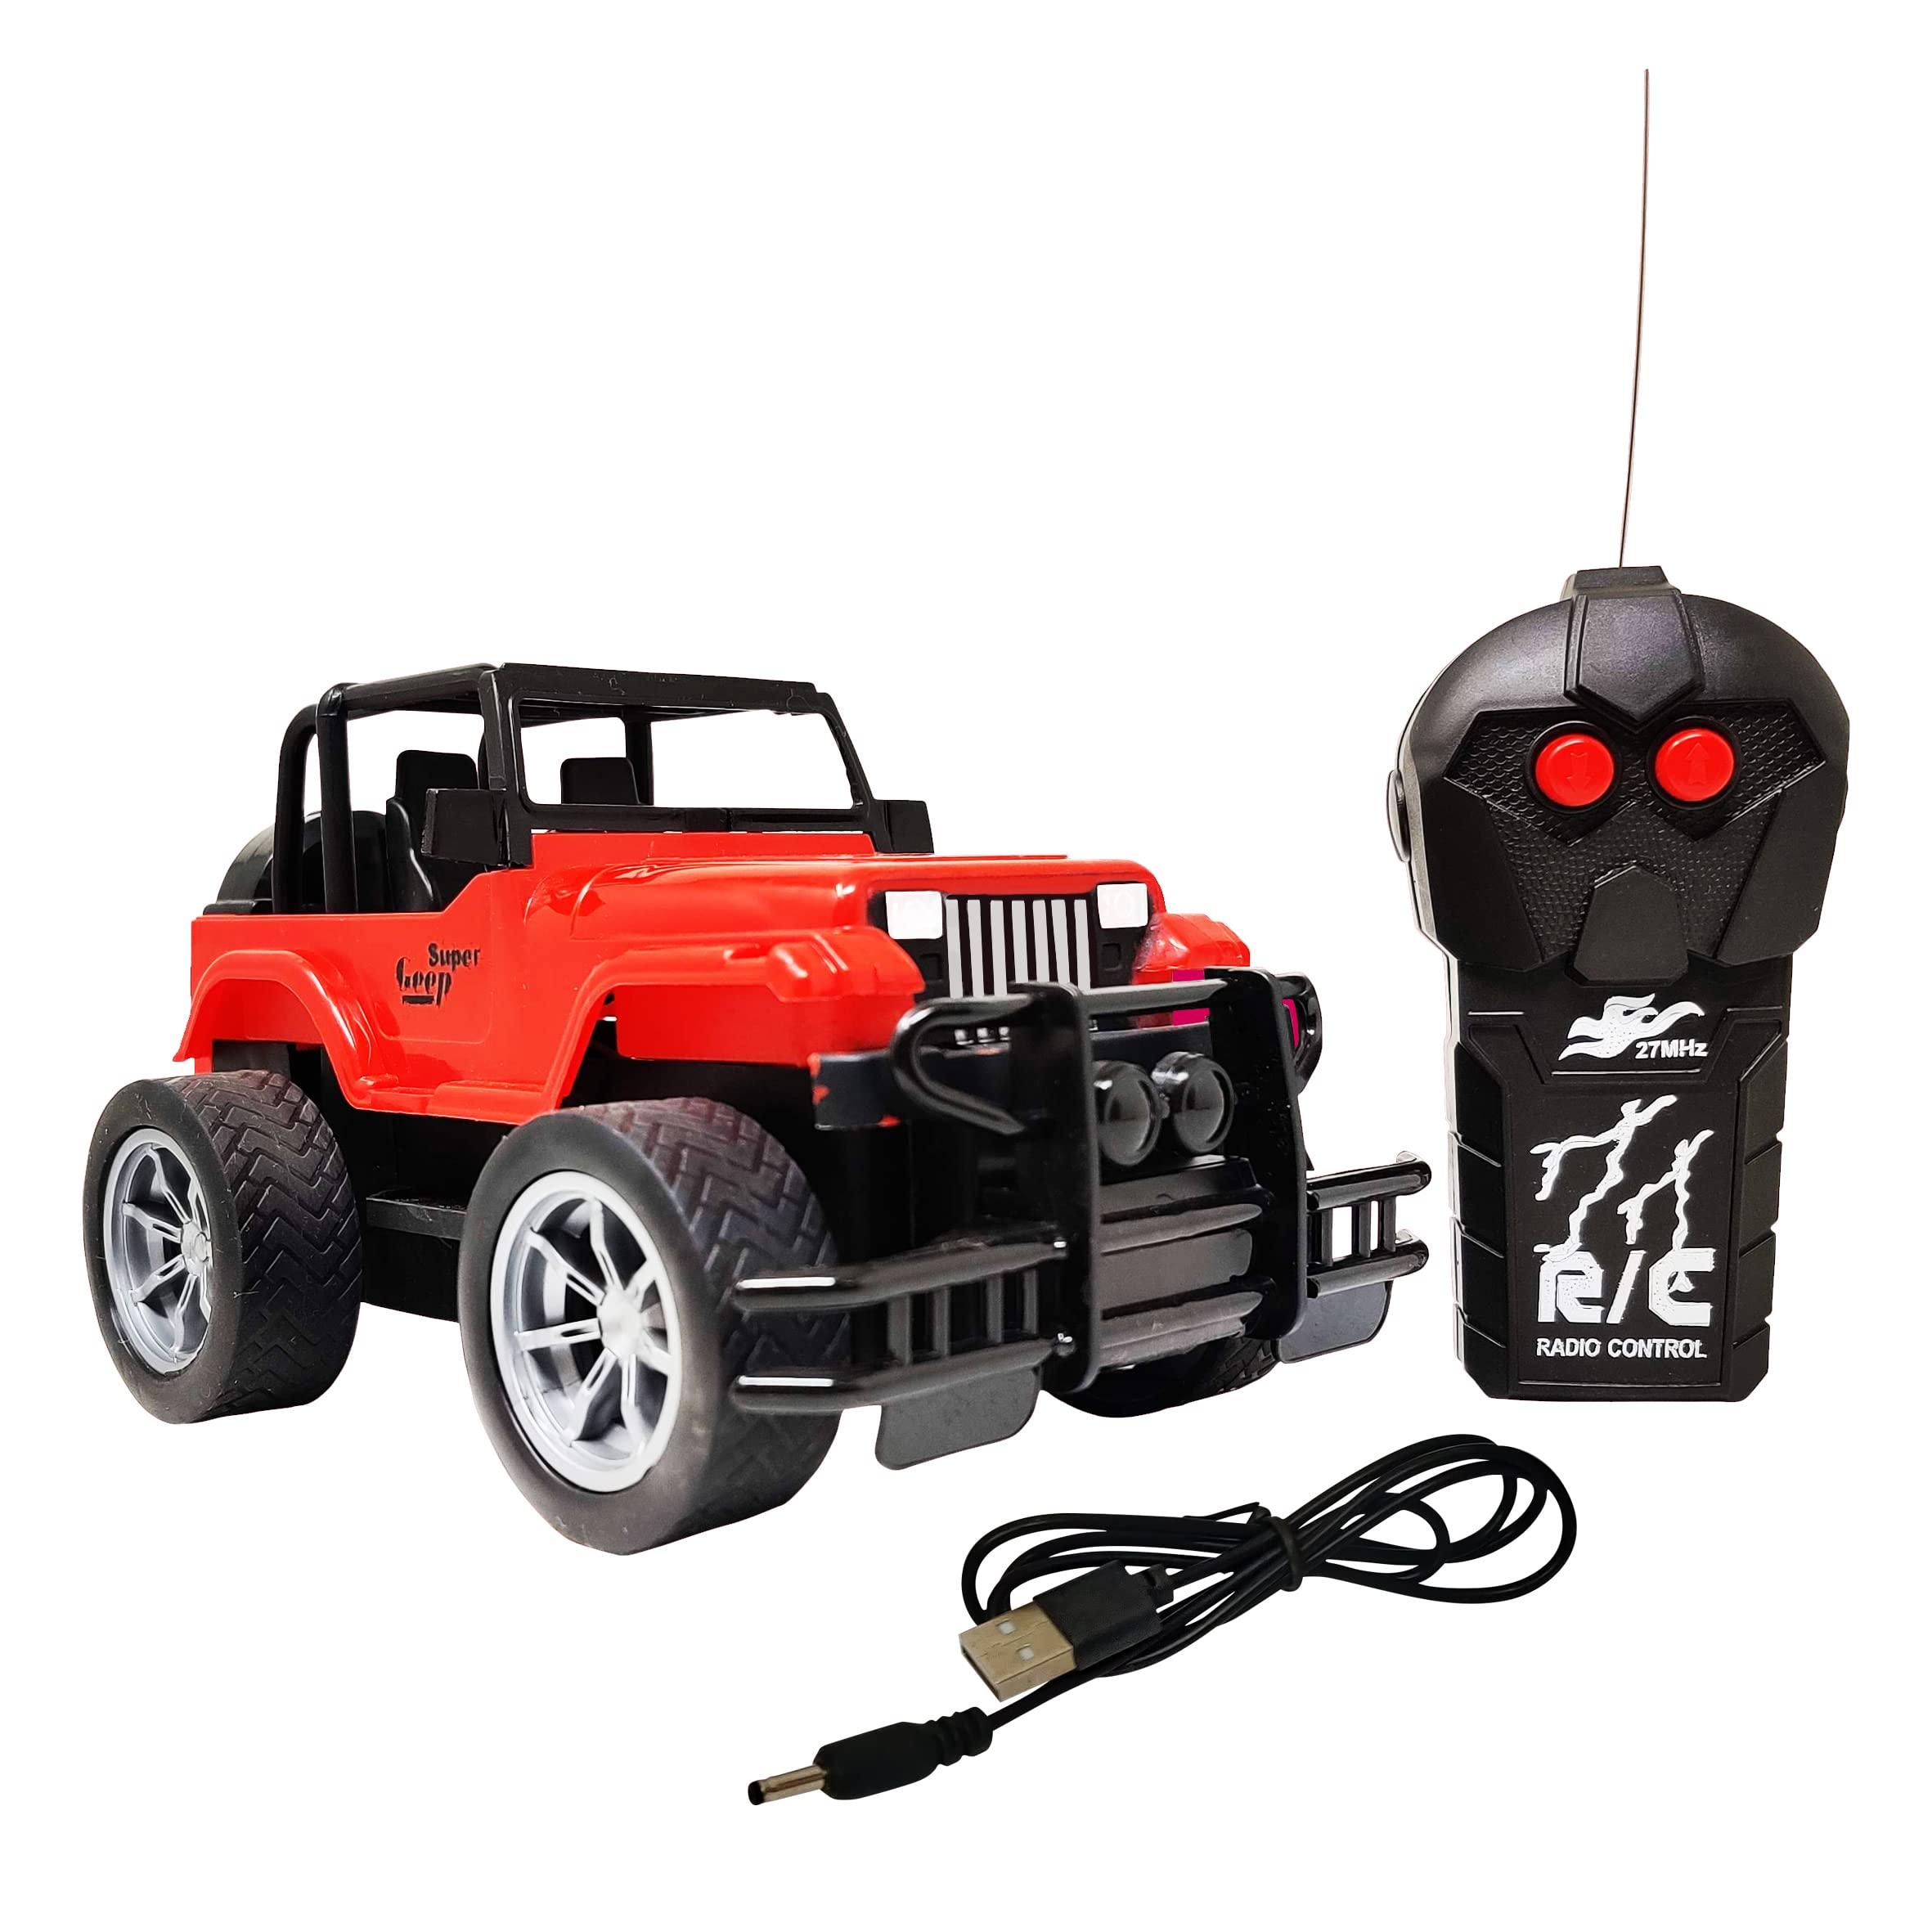 Jeep Remote Car: Top-rated Jeep Remote Cars on Amazon